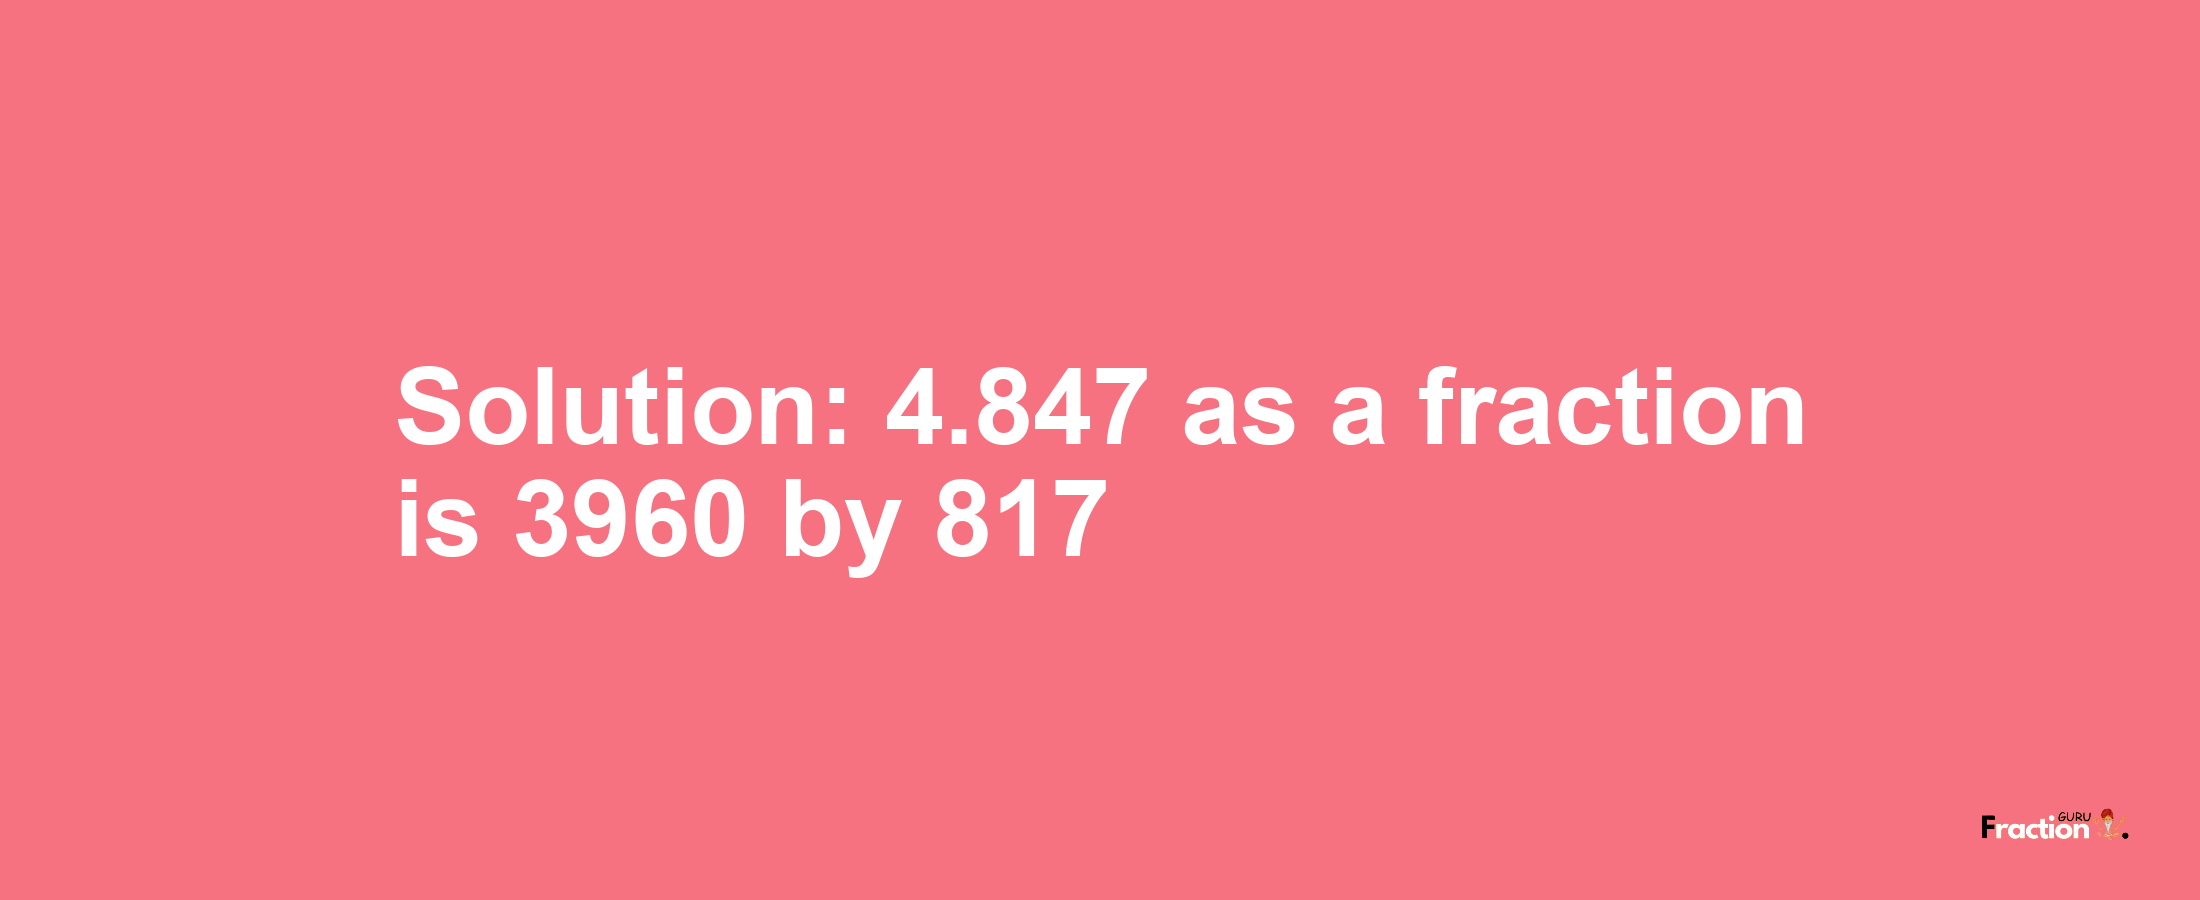 Solution:4.847 as a fraction is 3960/817